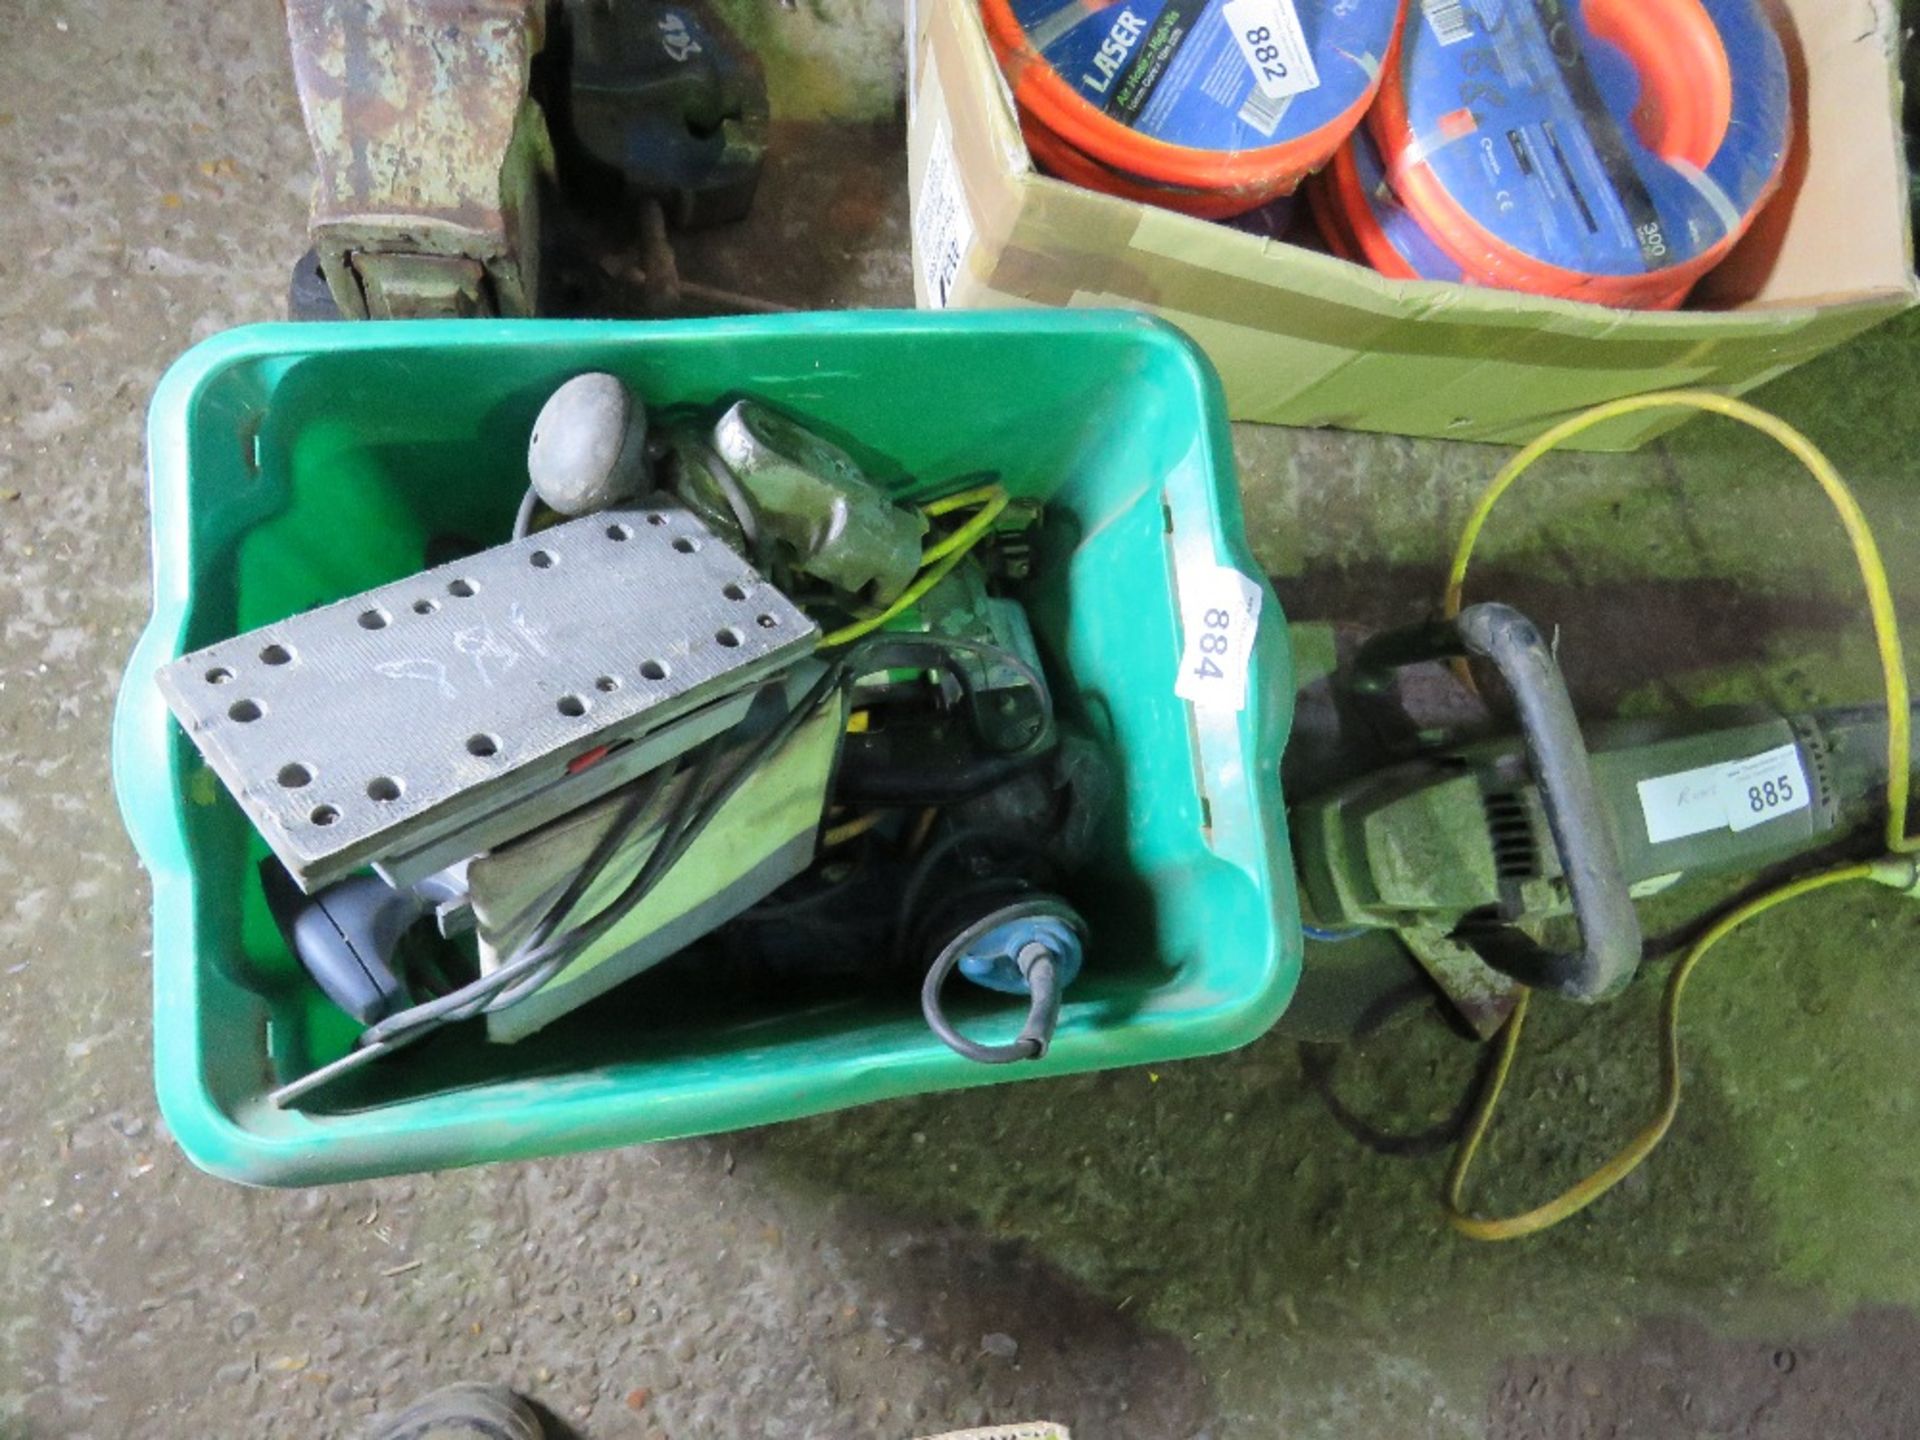 4 X POWER TOOLS: NIBBLER, DRIVER, JIGSAW, SANDER. SOLD UNDER THE AUCTIONEERS MARGIN SCHEME THERFORE